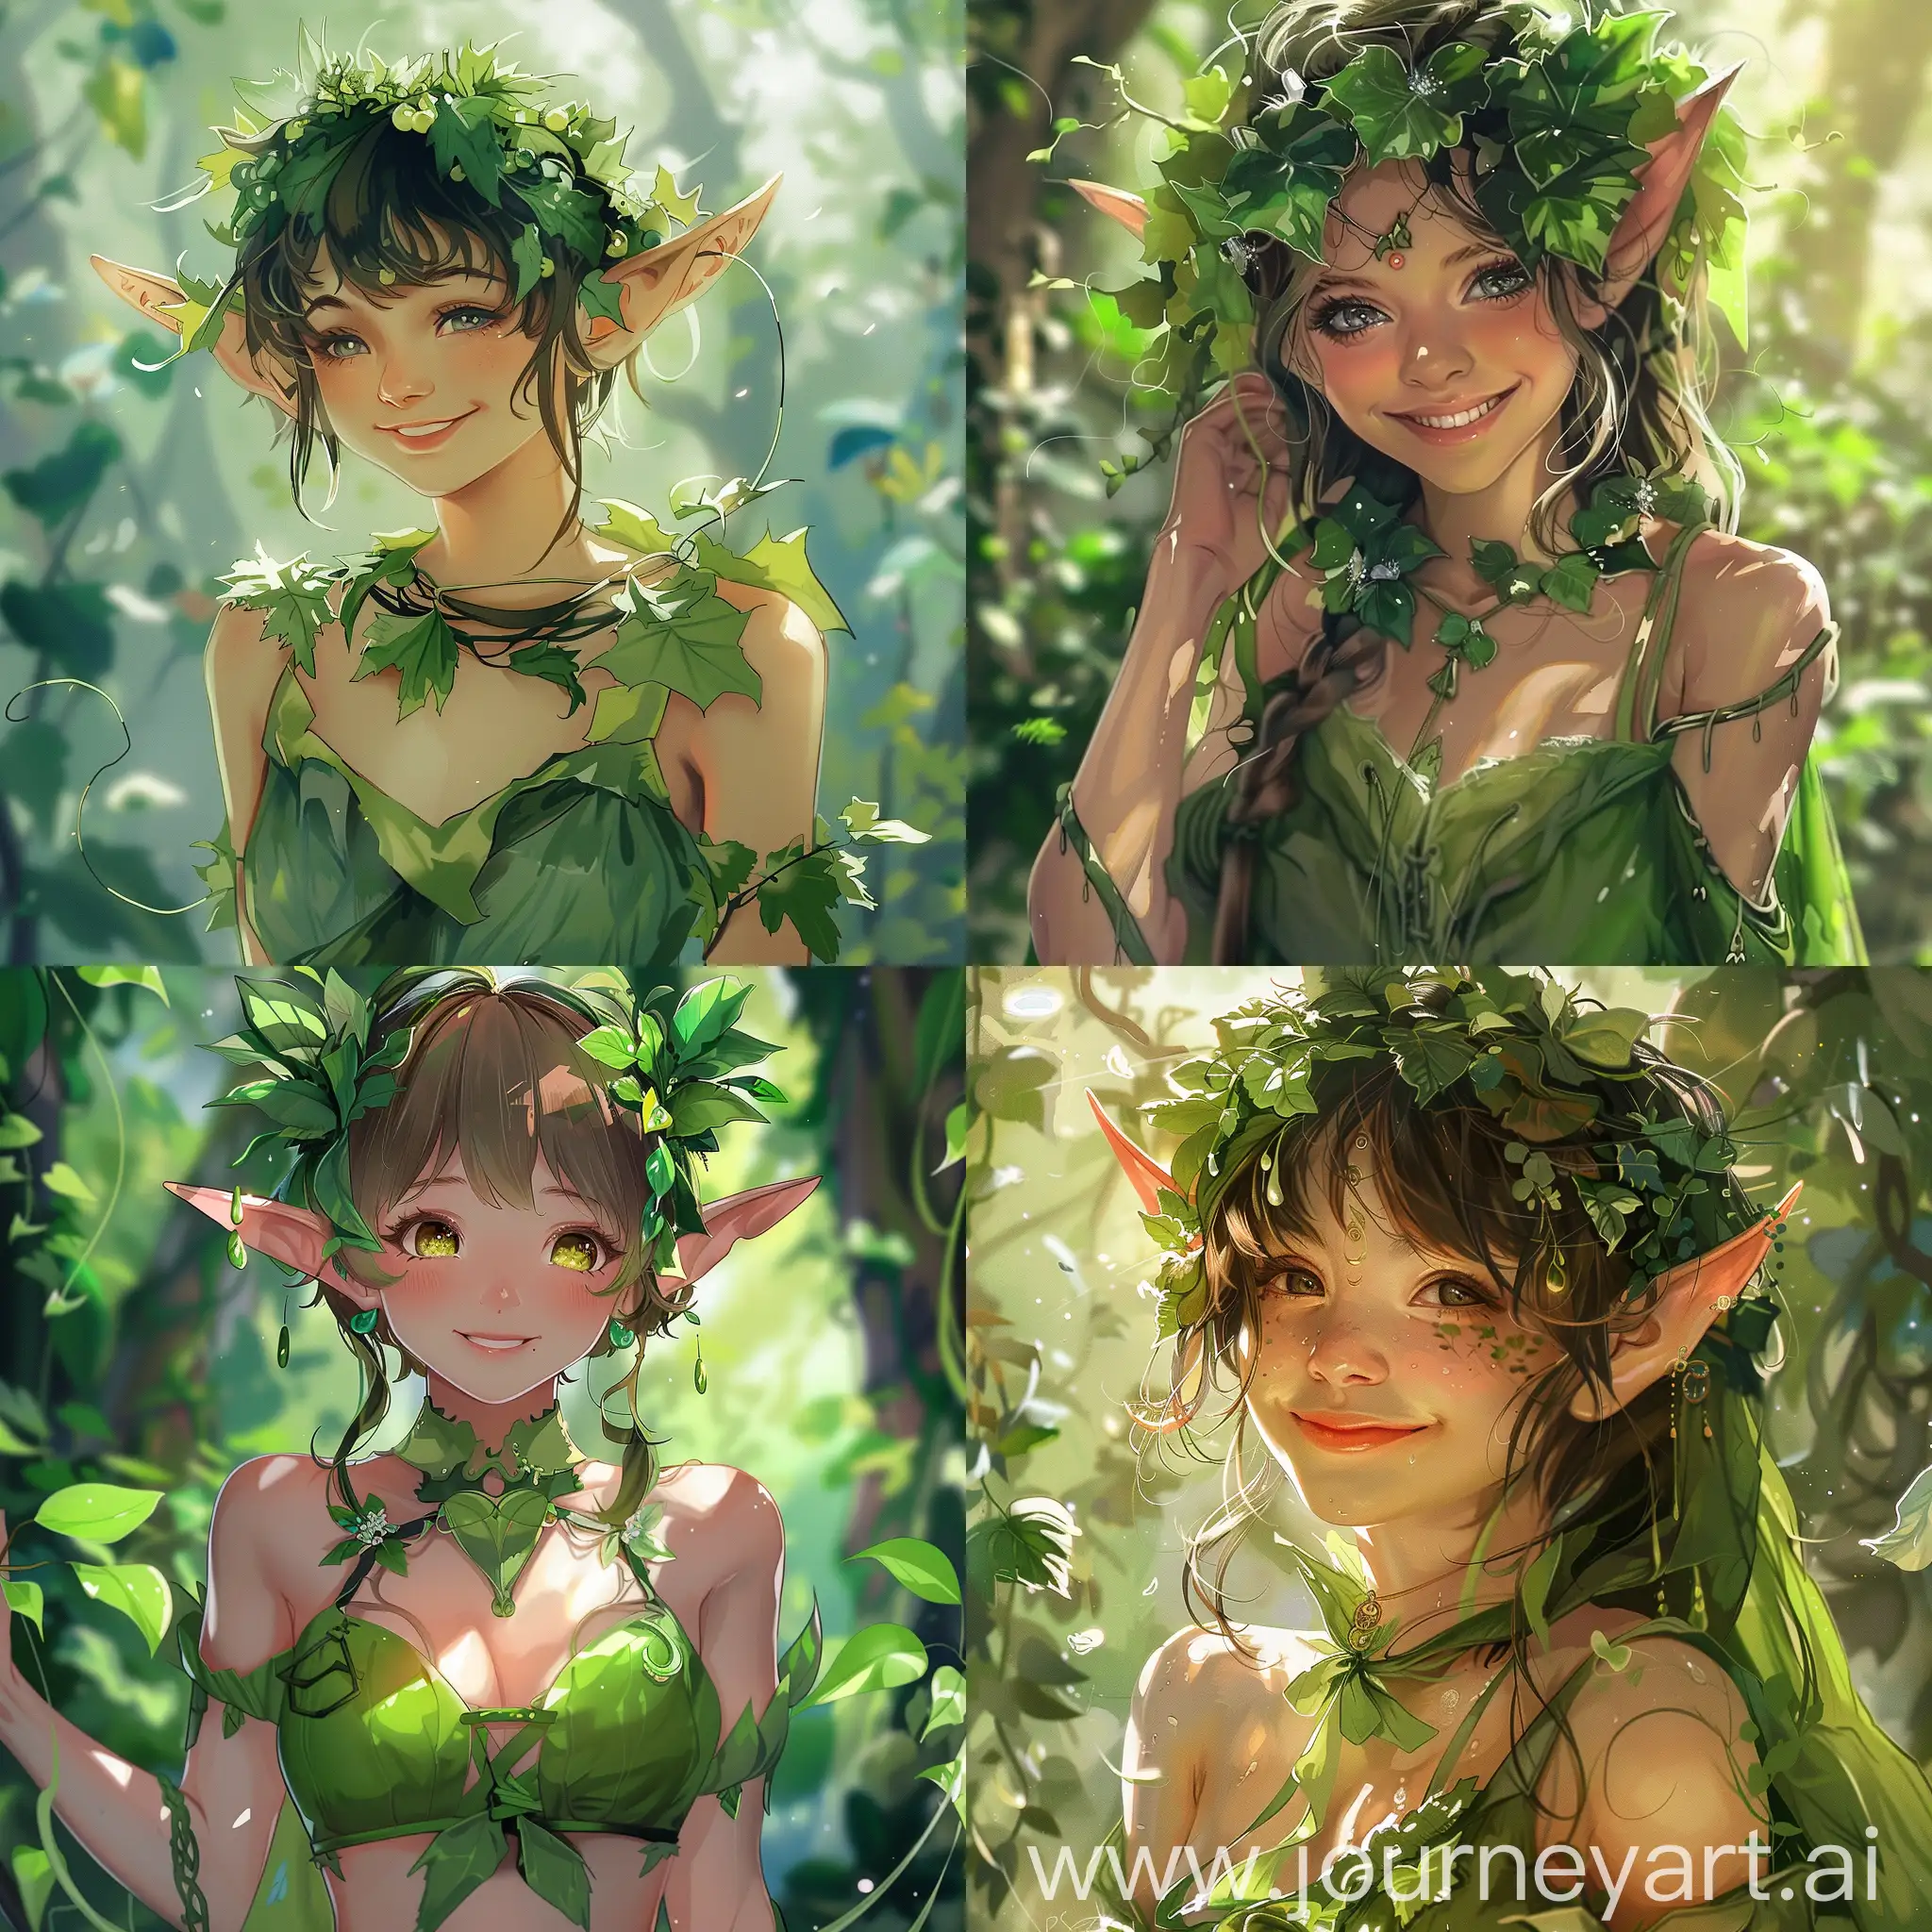 Anime illustration of an elf woman in green attire, cute face expression, smiling, nature theme, art, surreal, illustration